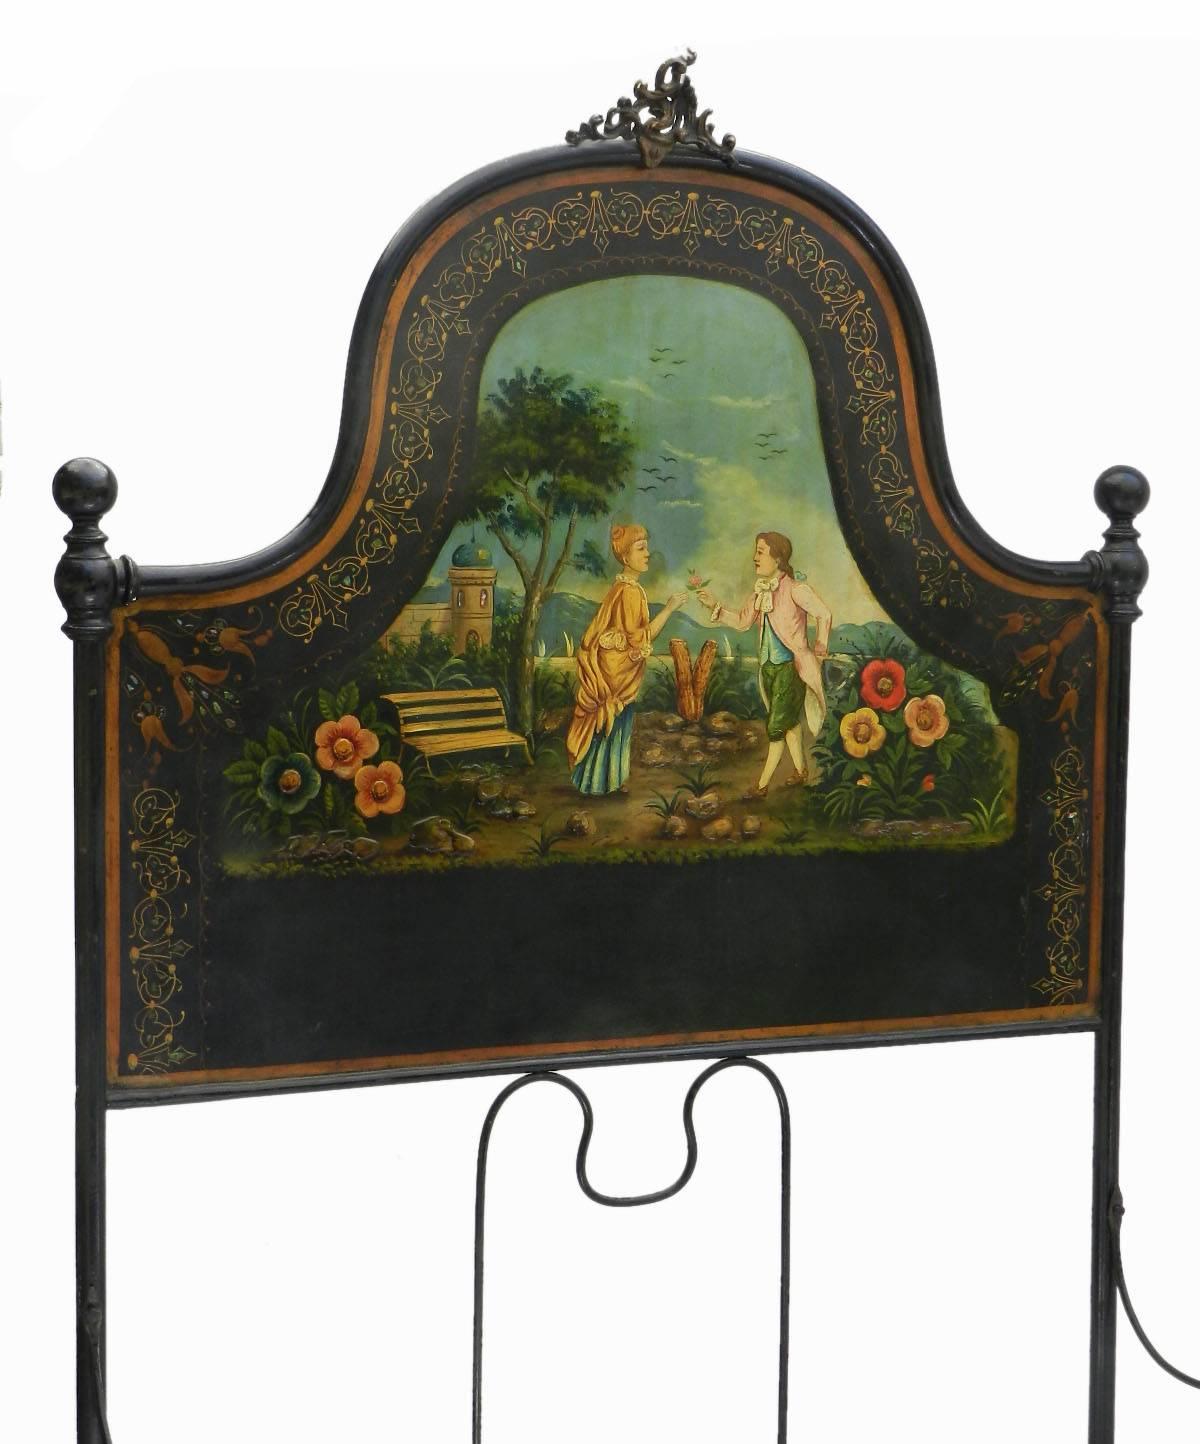 French Antique Bed epoque Napoleon III painted Iron Tole
Inlaid mother-of-pearl 
This bed will take a 4 foot wide mattress resting on wooden slats or box spring divan base, please ask for more info if required
There are bars across the bed for the